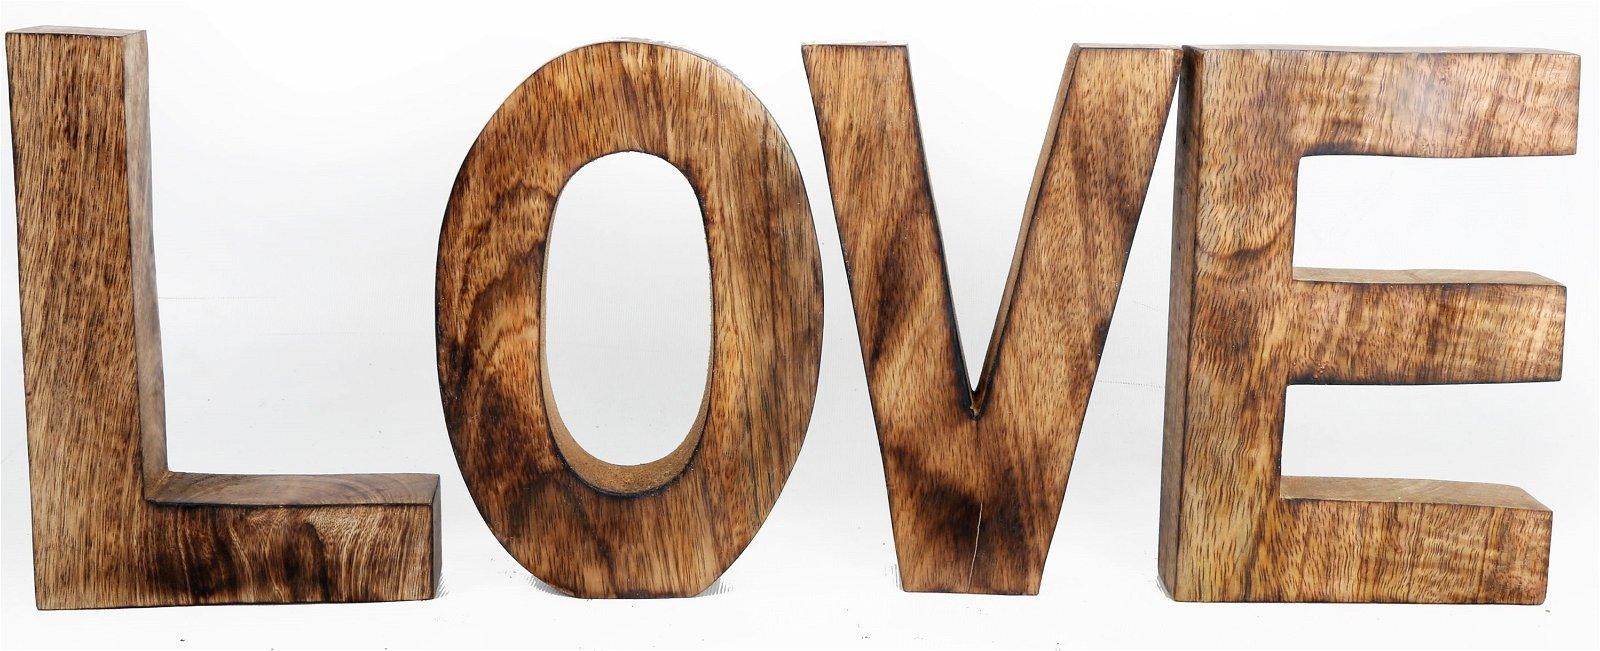 View LOVE Wooden Letters Sign information